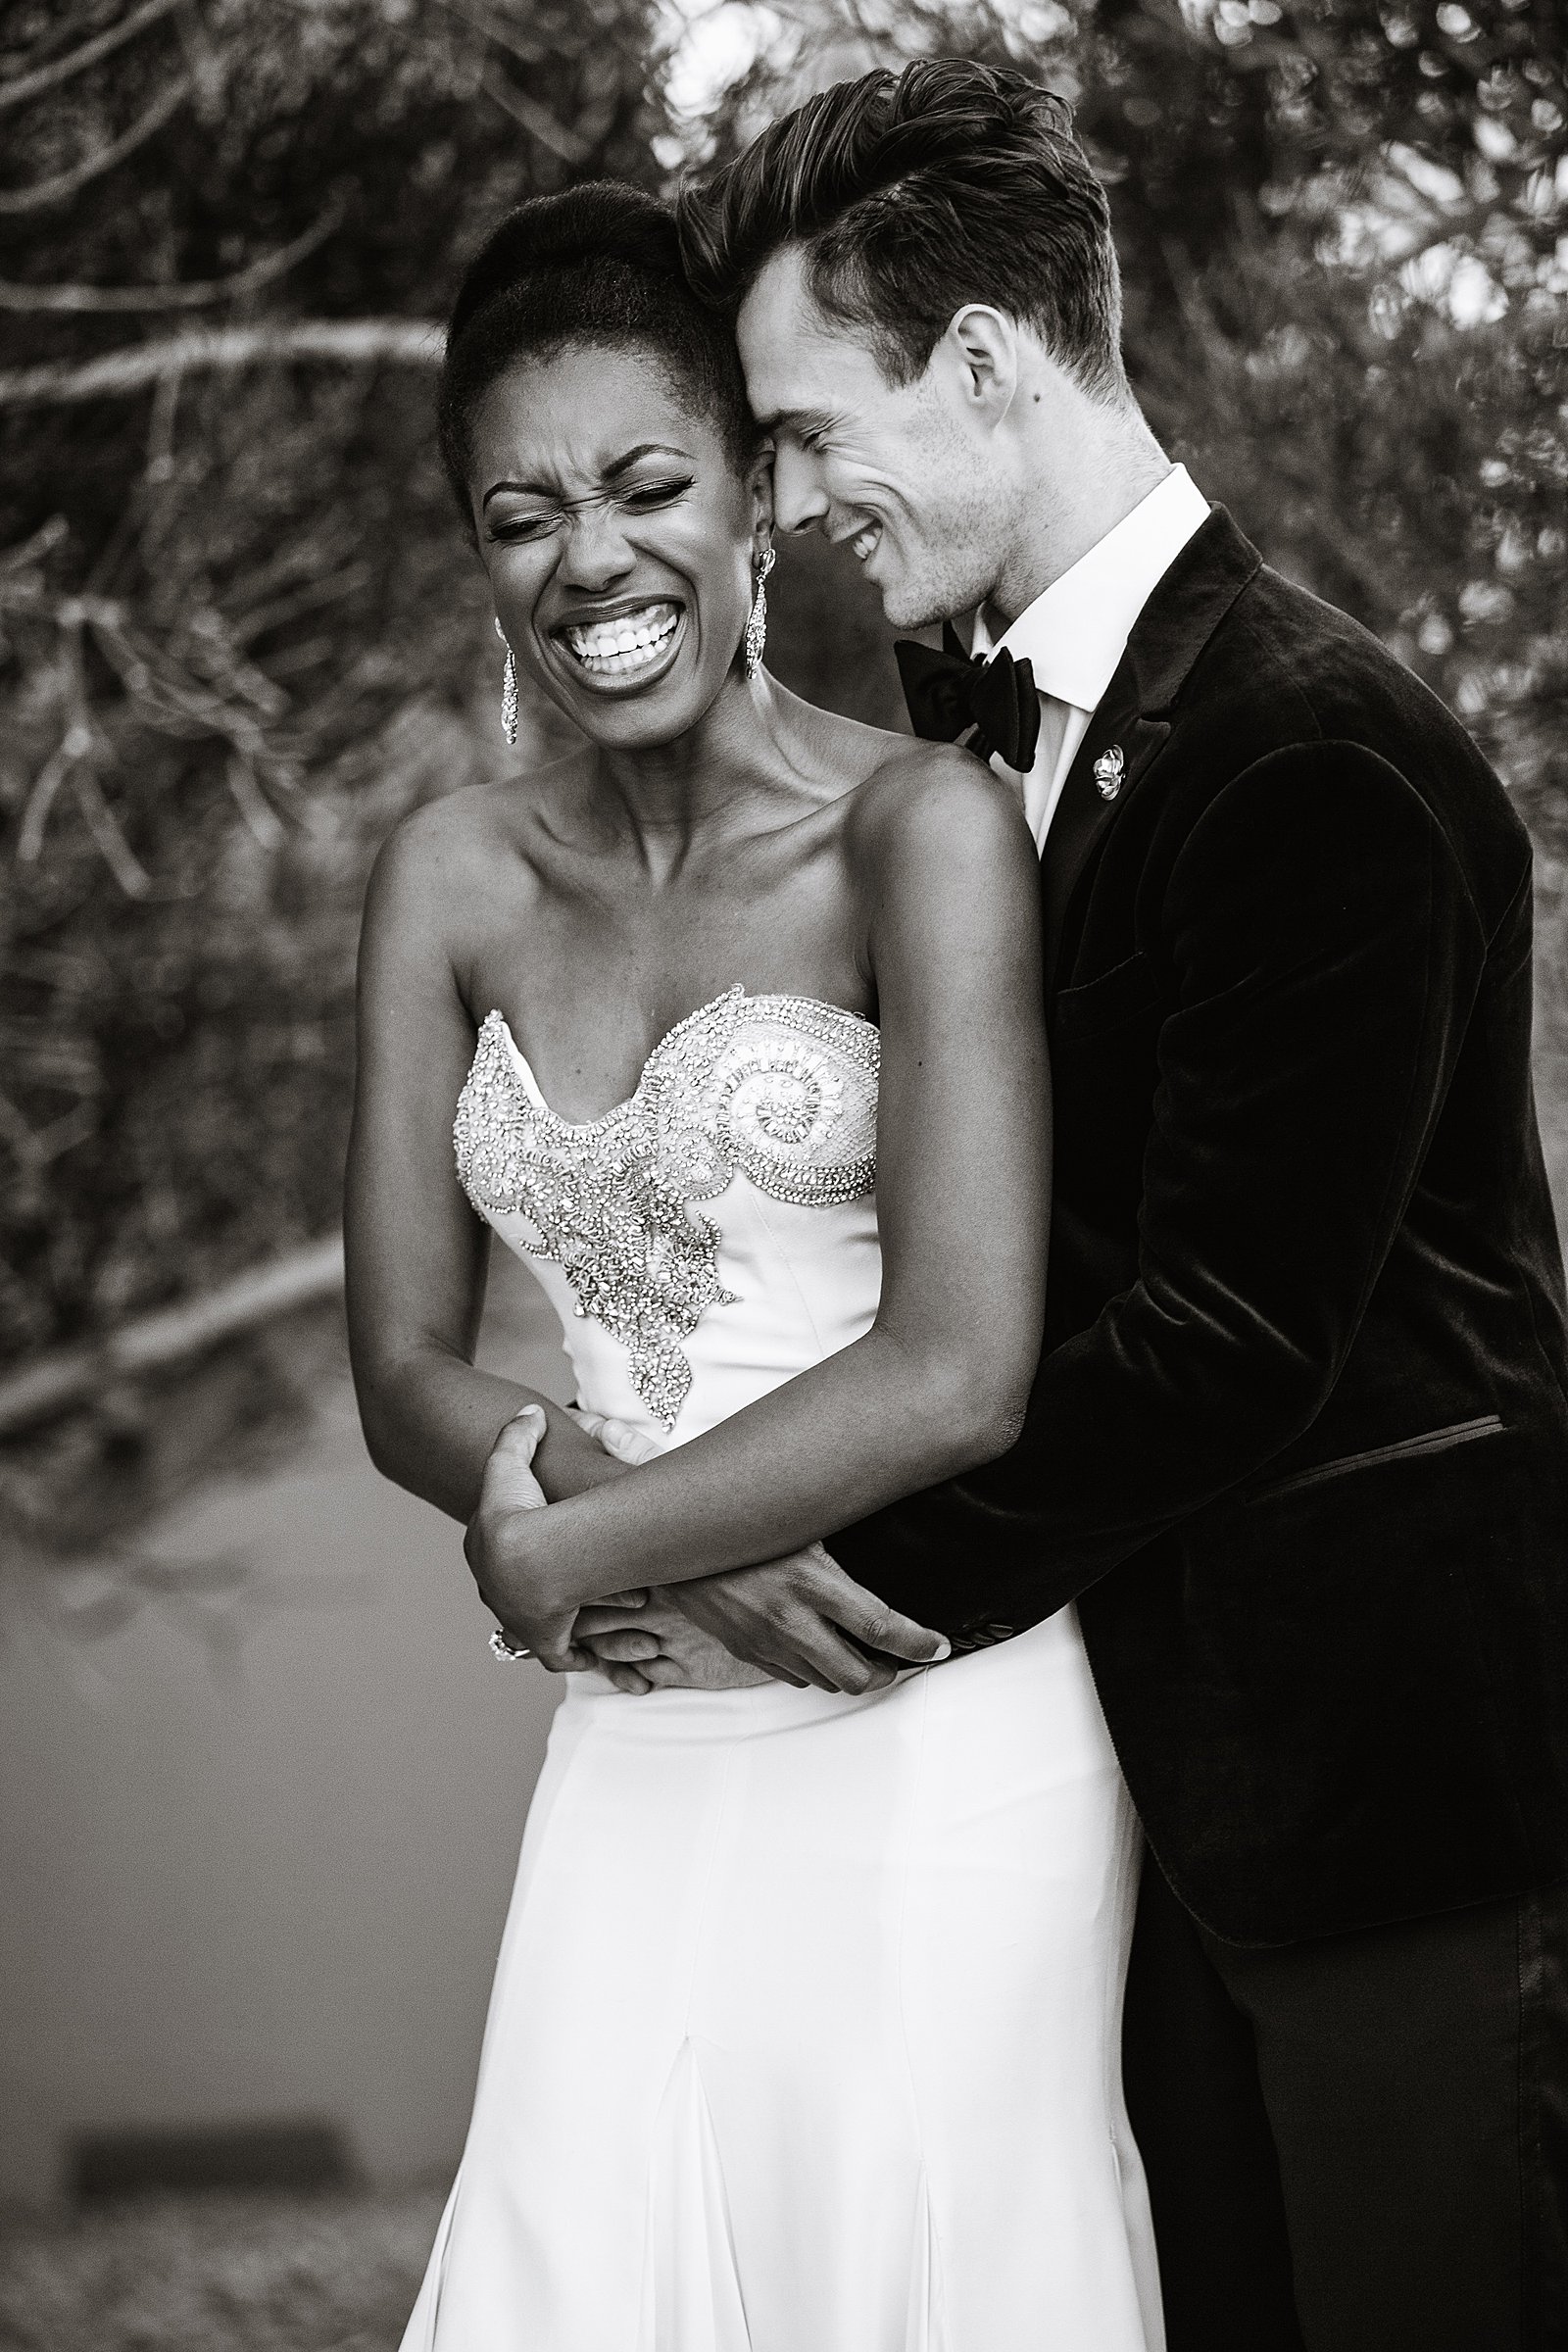 Bride and Groom laughing together during their multicultural wedding by Phoenix wedding photographer PMA Photography.